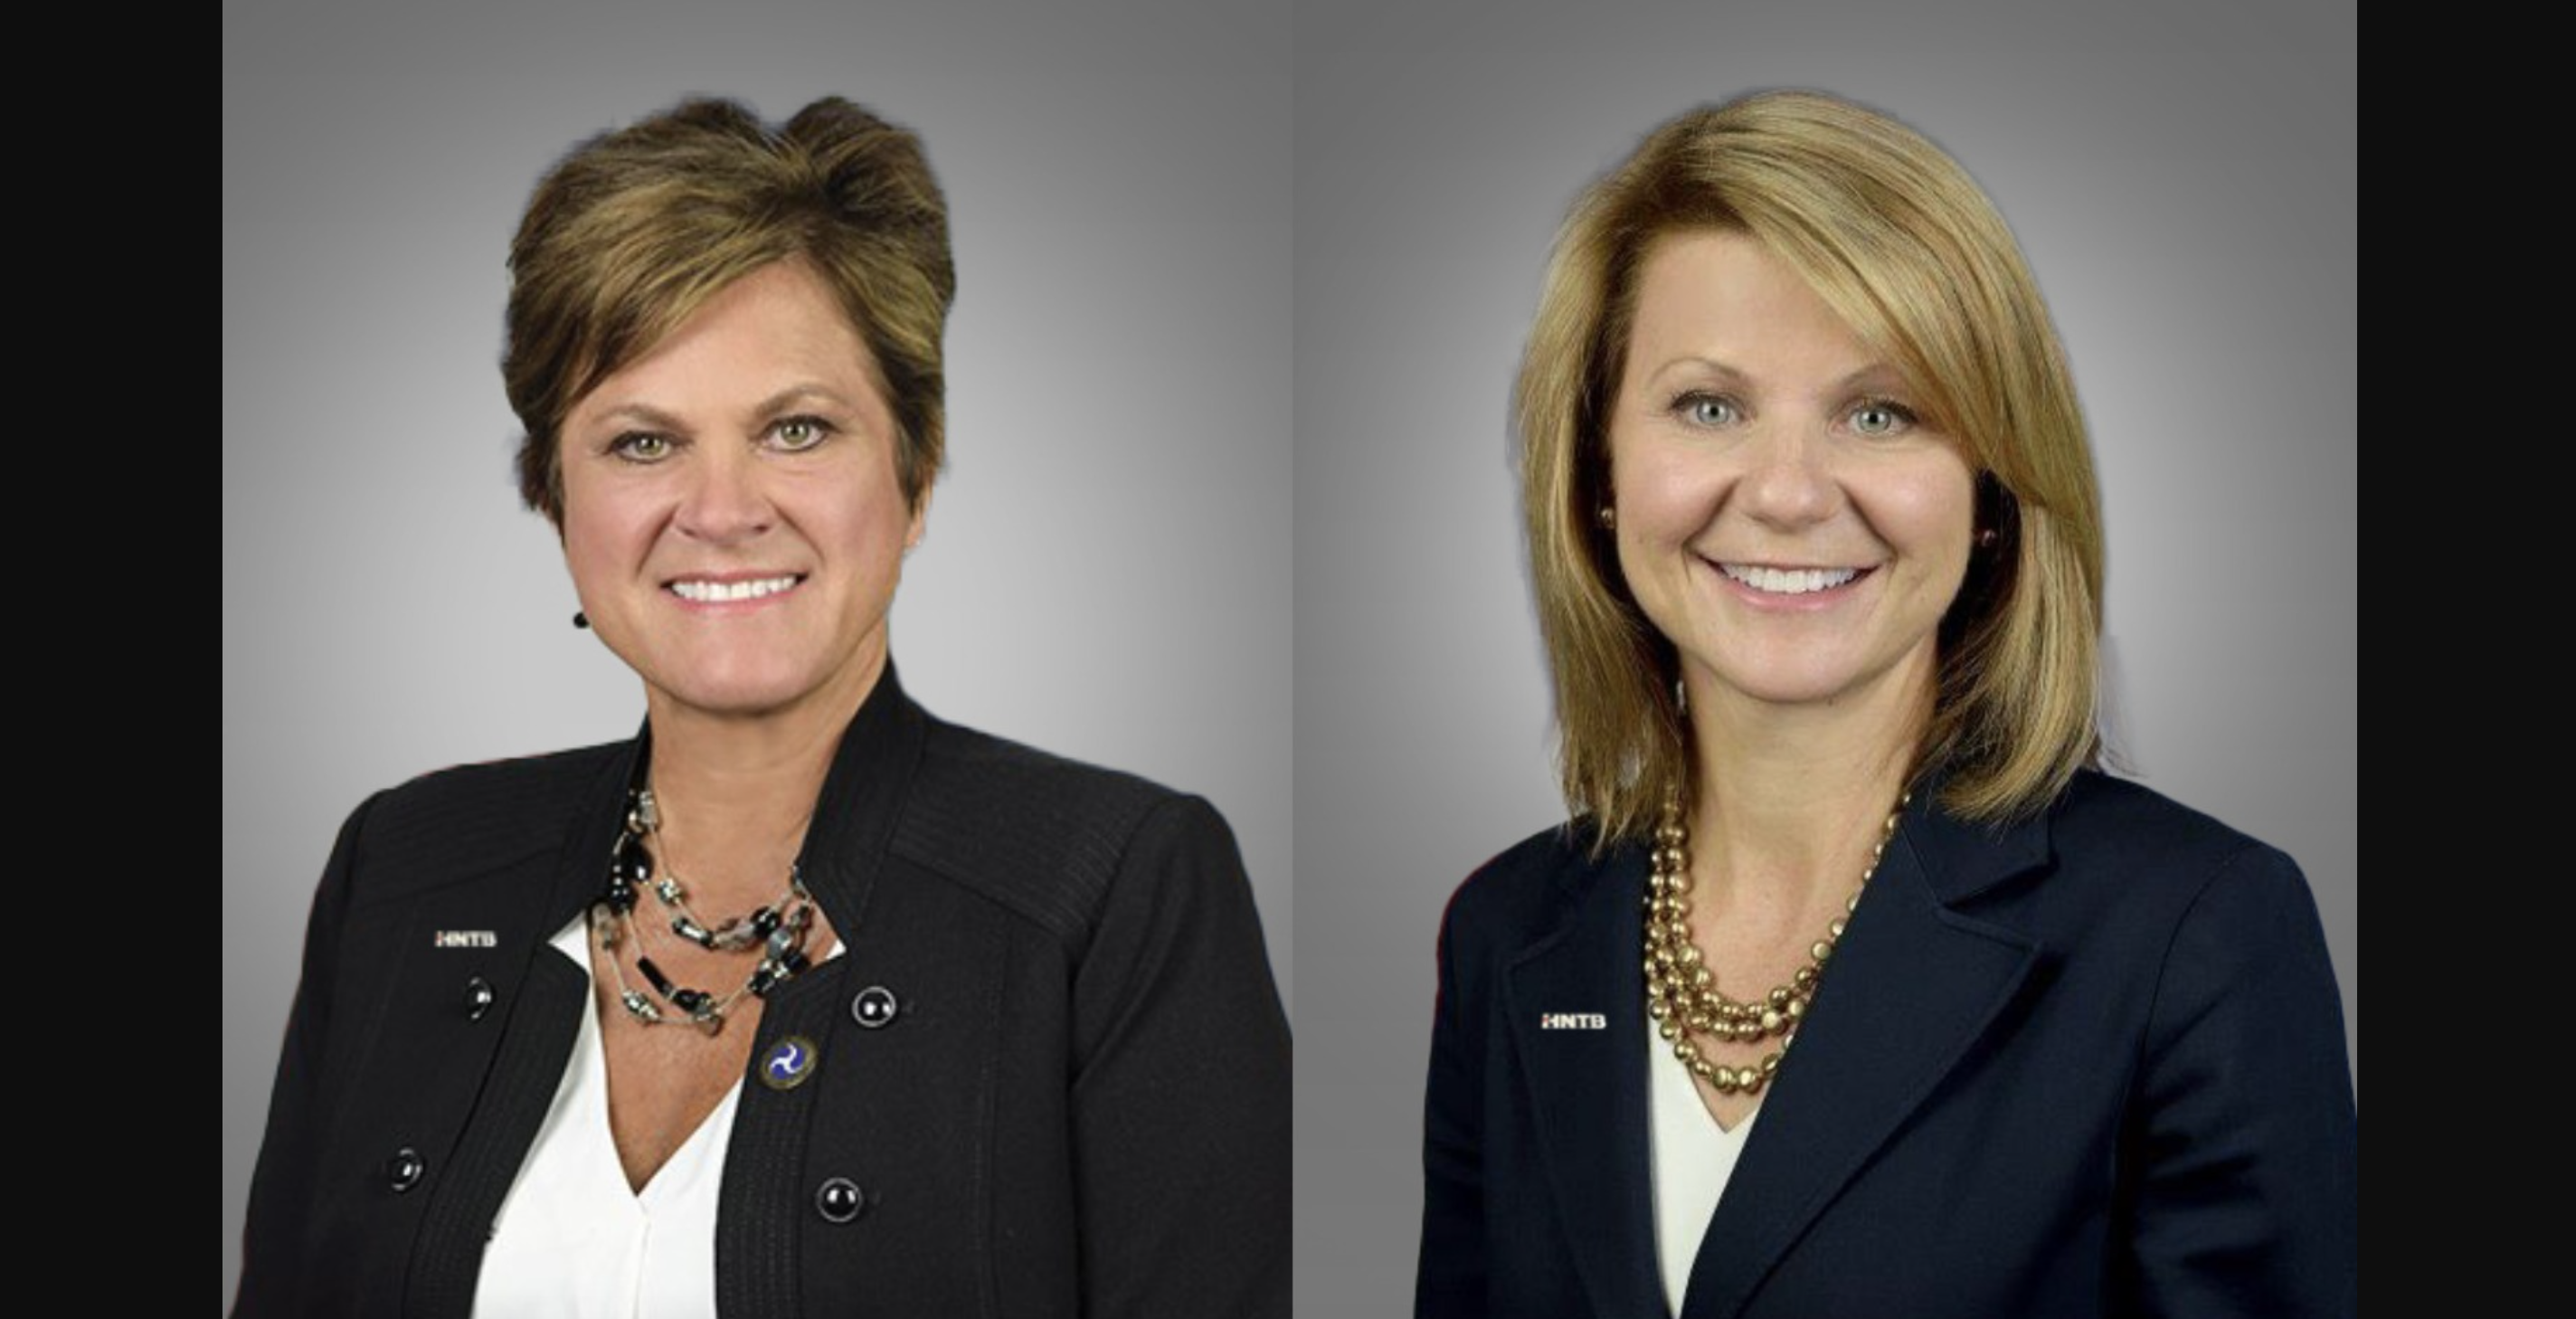 K. Jane Williams (left) and Cheryl Walker are each serving as National Practice Consultant and Vice President in the HNTB’s Advisory practice.